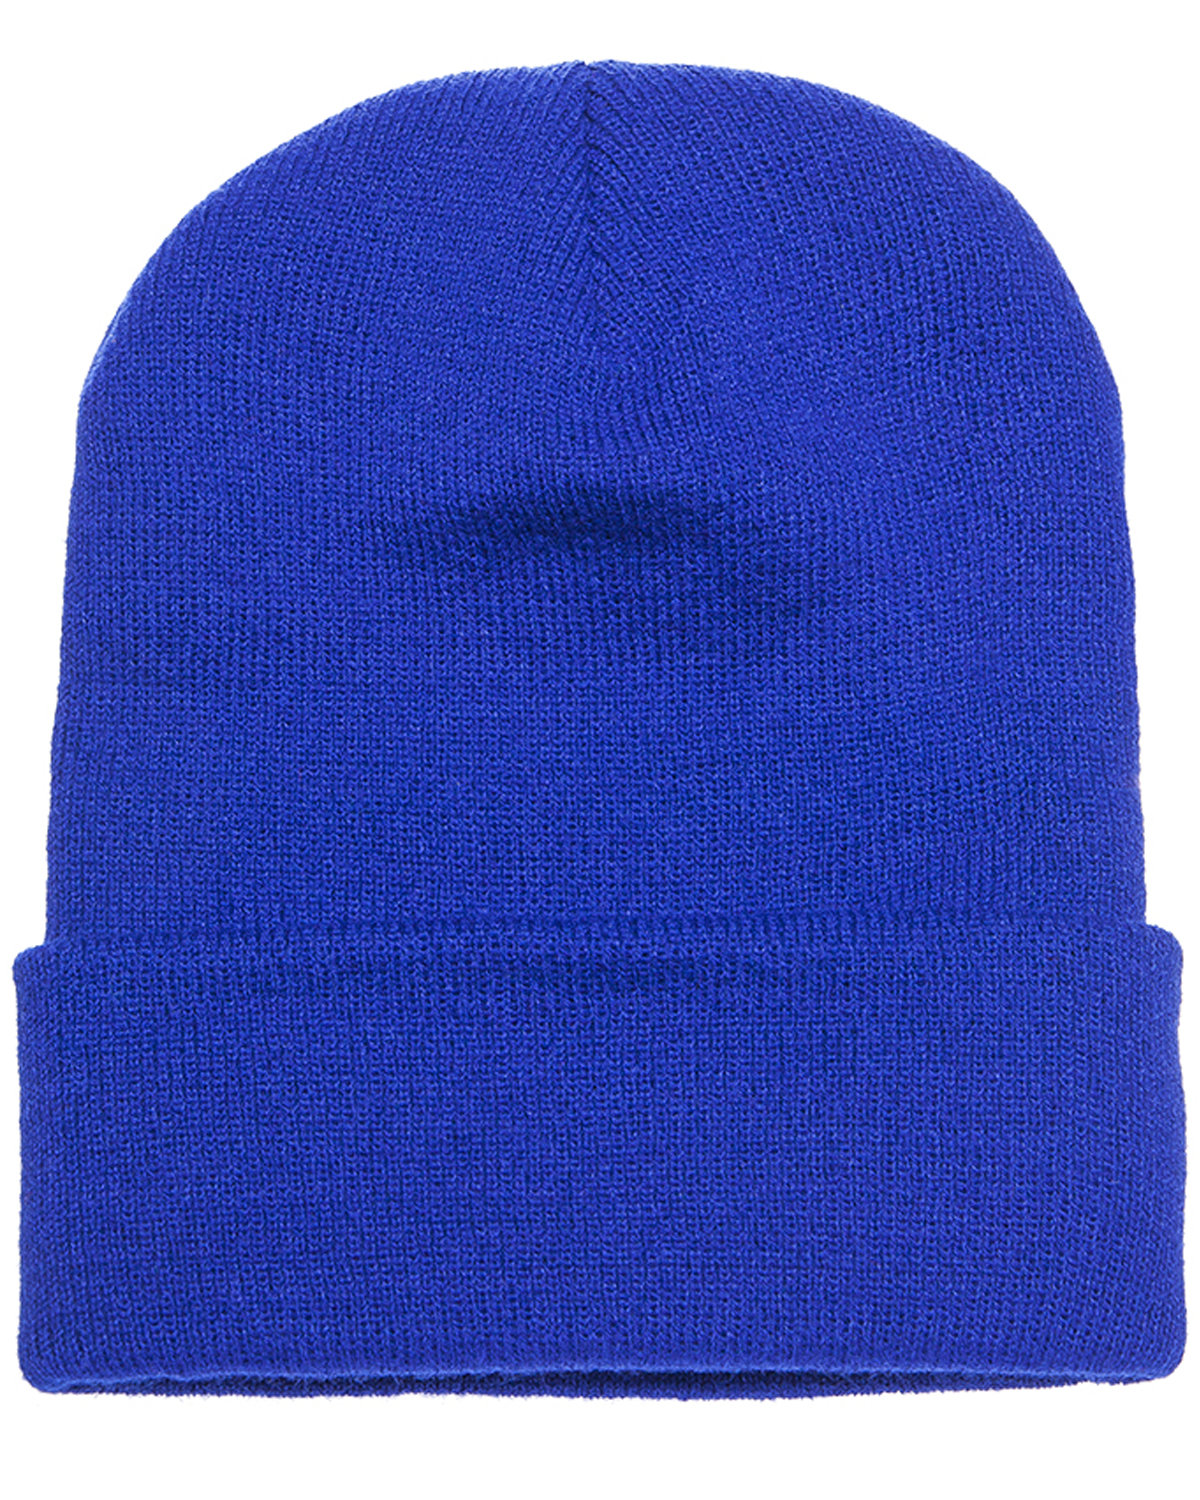 Beanie Cuffed Knit Yupoong alphabroder Adult |